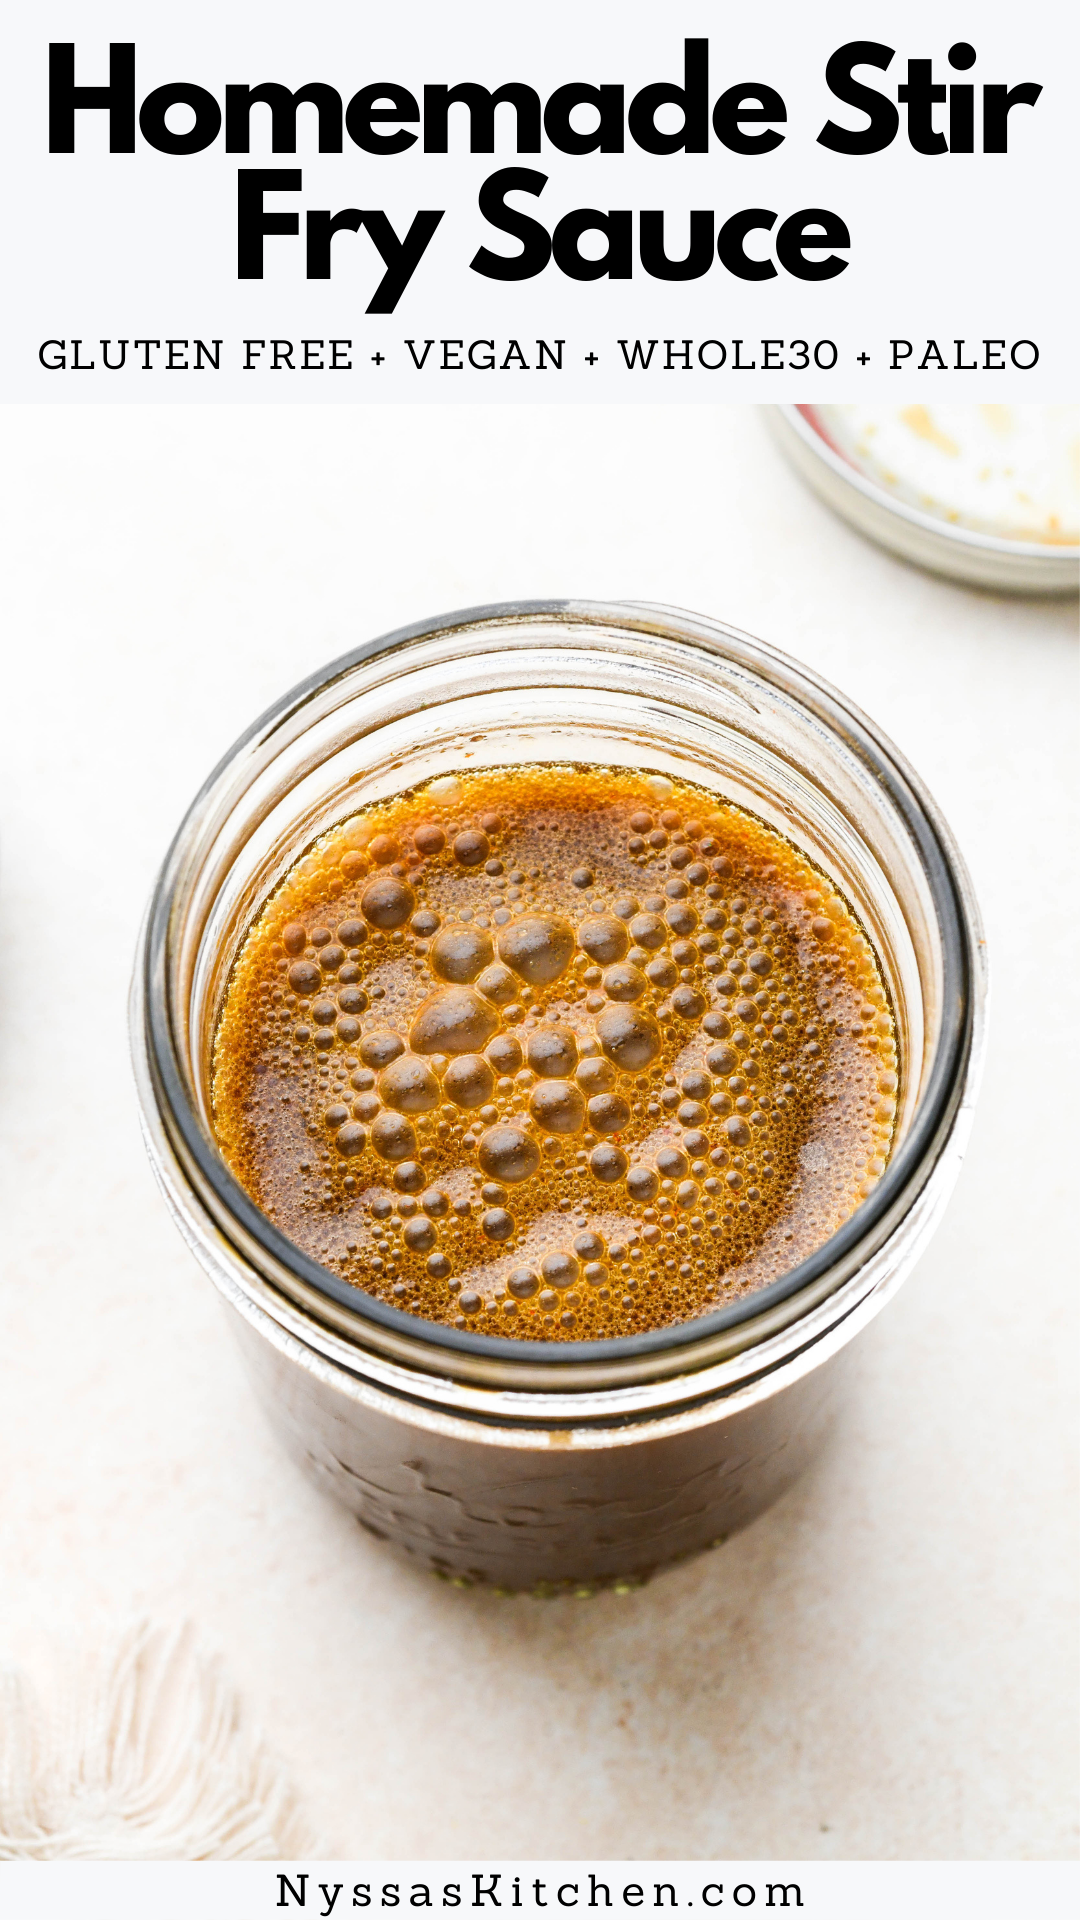 This homemade stir fry sauce is the perfect all purpose sauce for all of your stir fry recipes - great for everything from vegetables to chicken, beef, shrimp, or pork. Simple and easy to make, and much healthier than most store bought options. Naturally sweetened, gluten free, vegan, paleo, and Whole30 compatible)